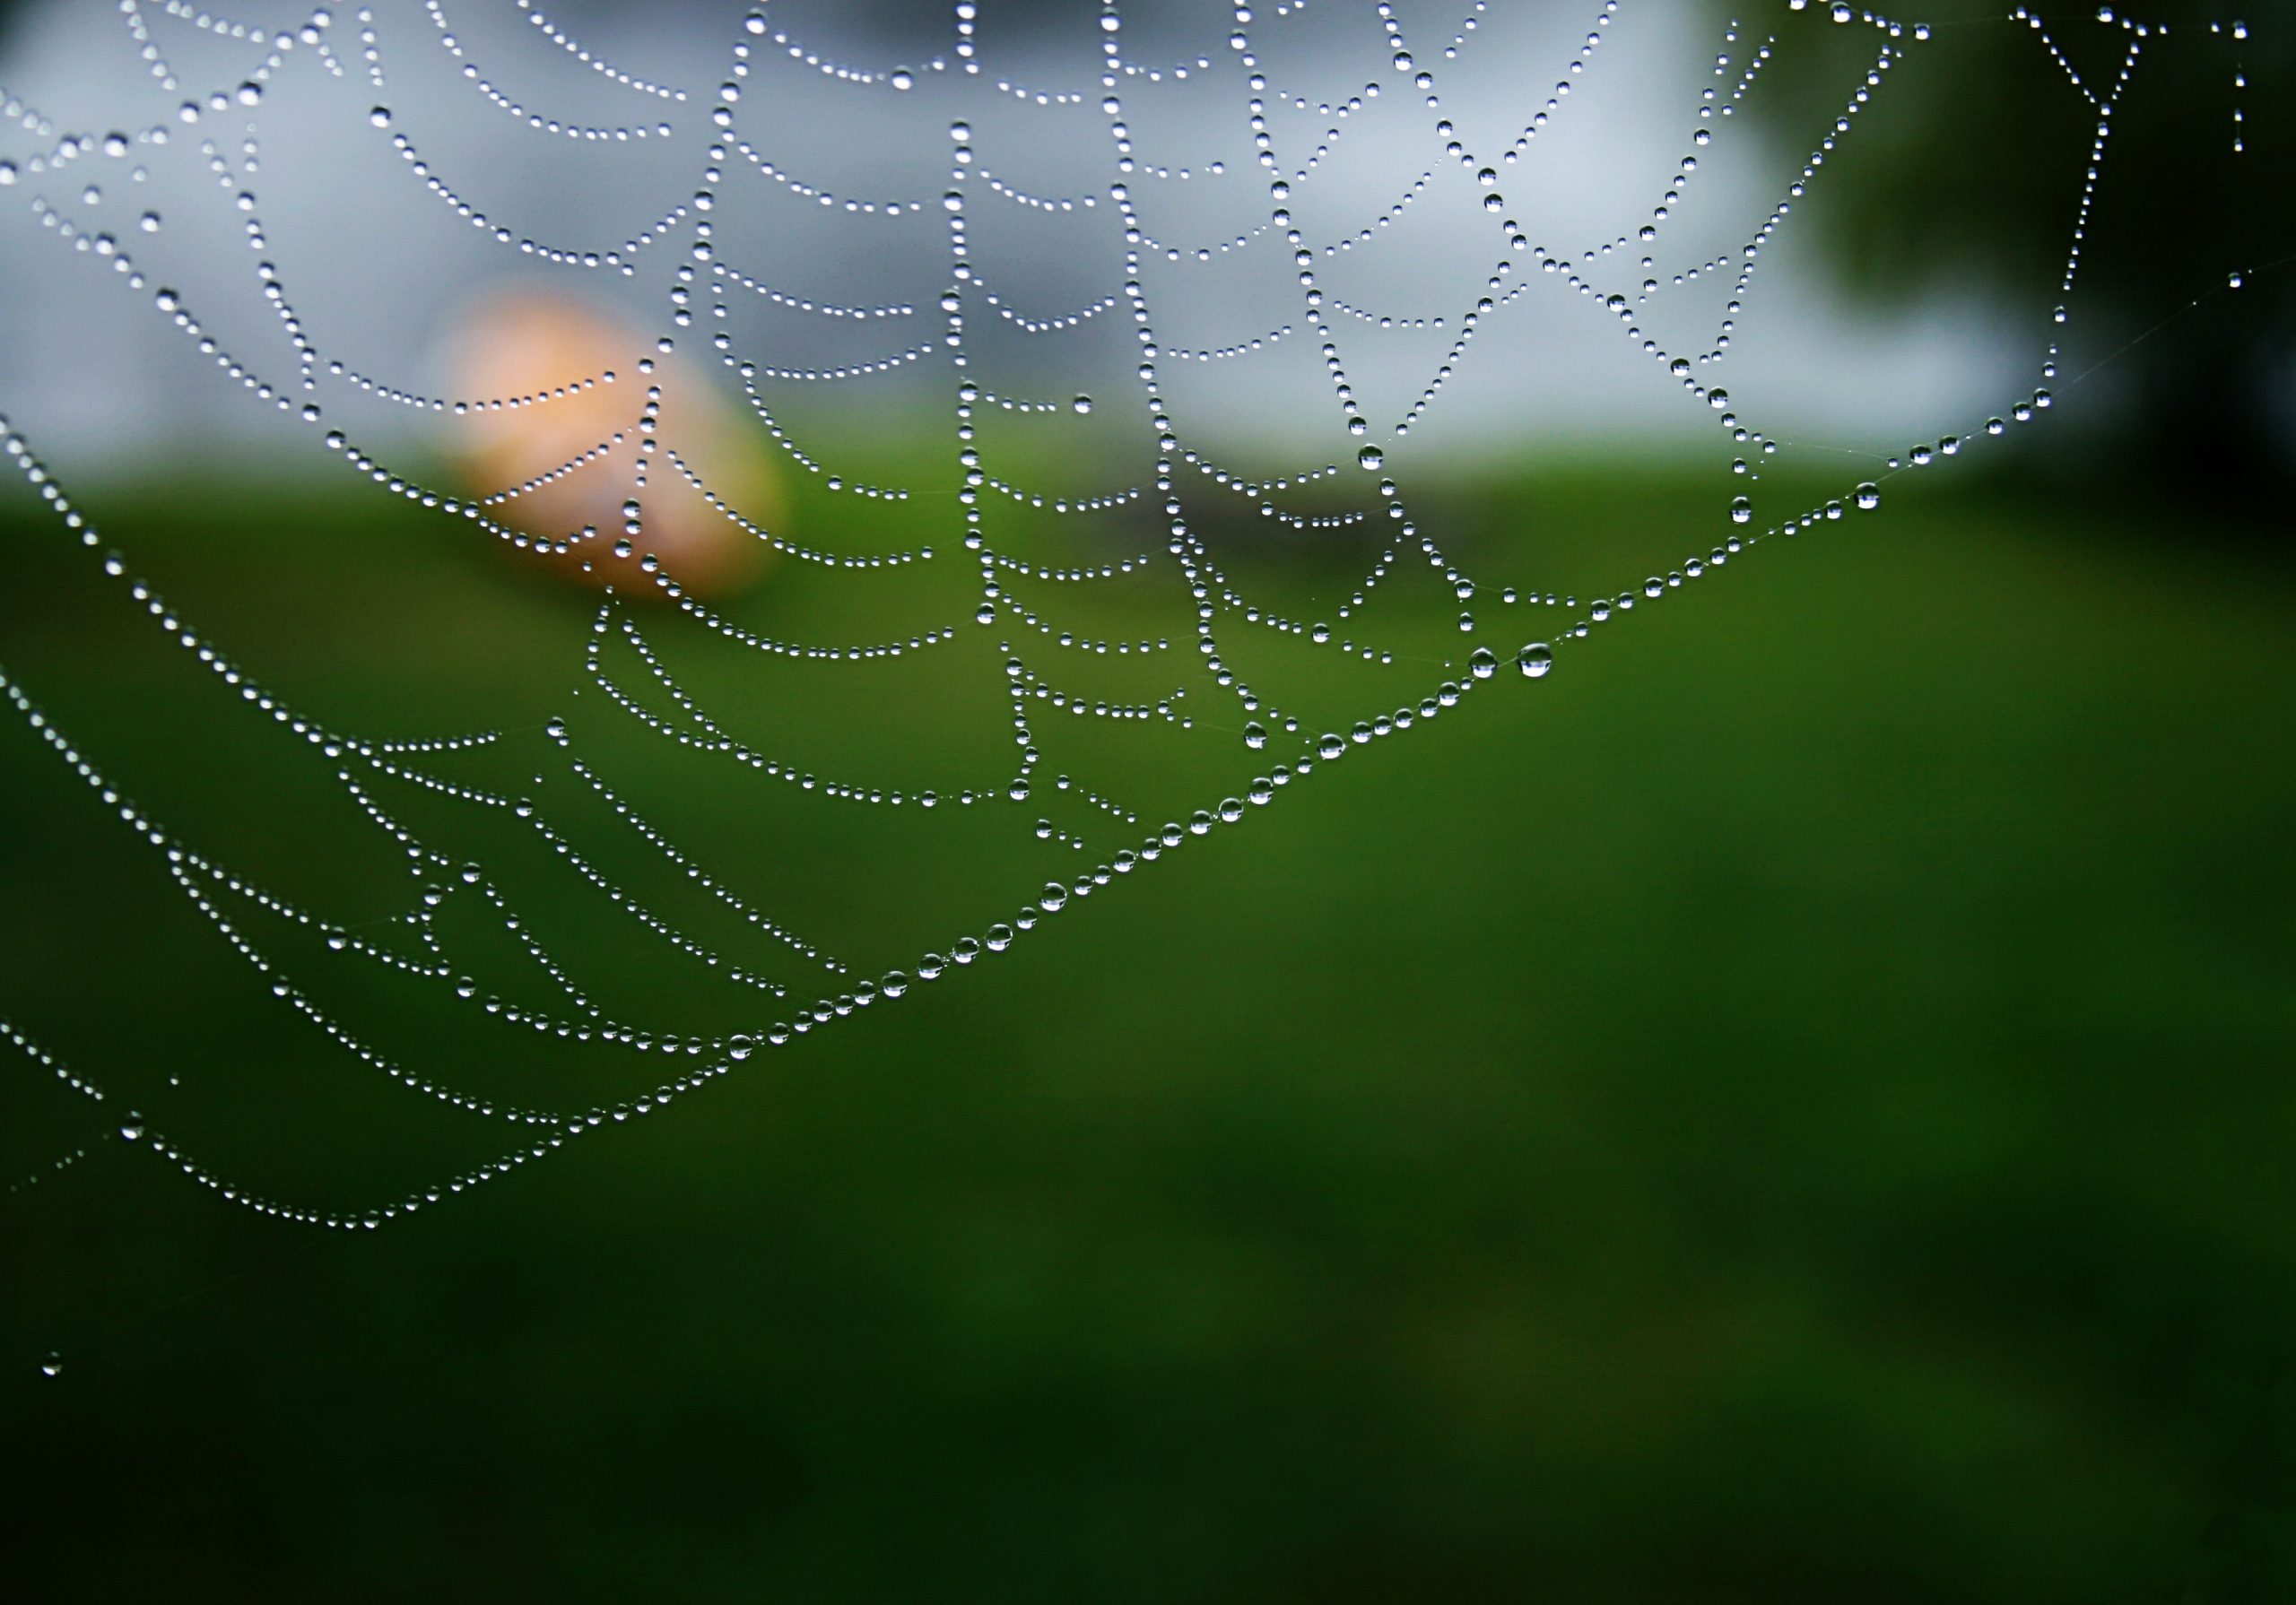 Water drops on a spider web